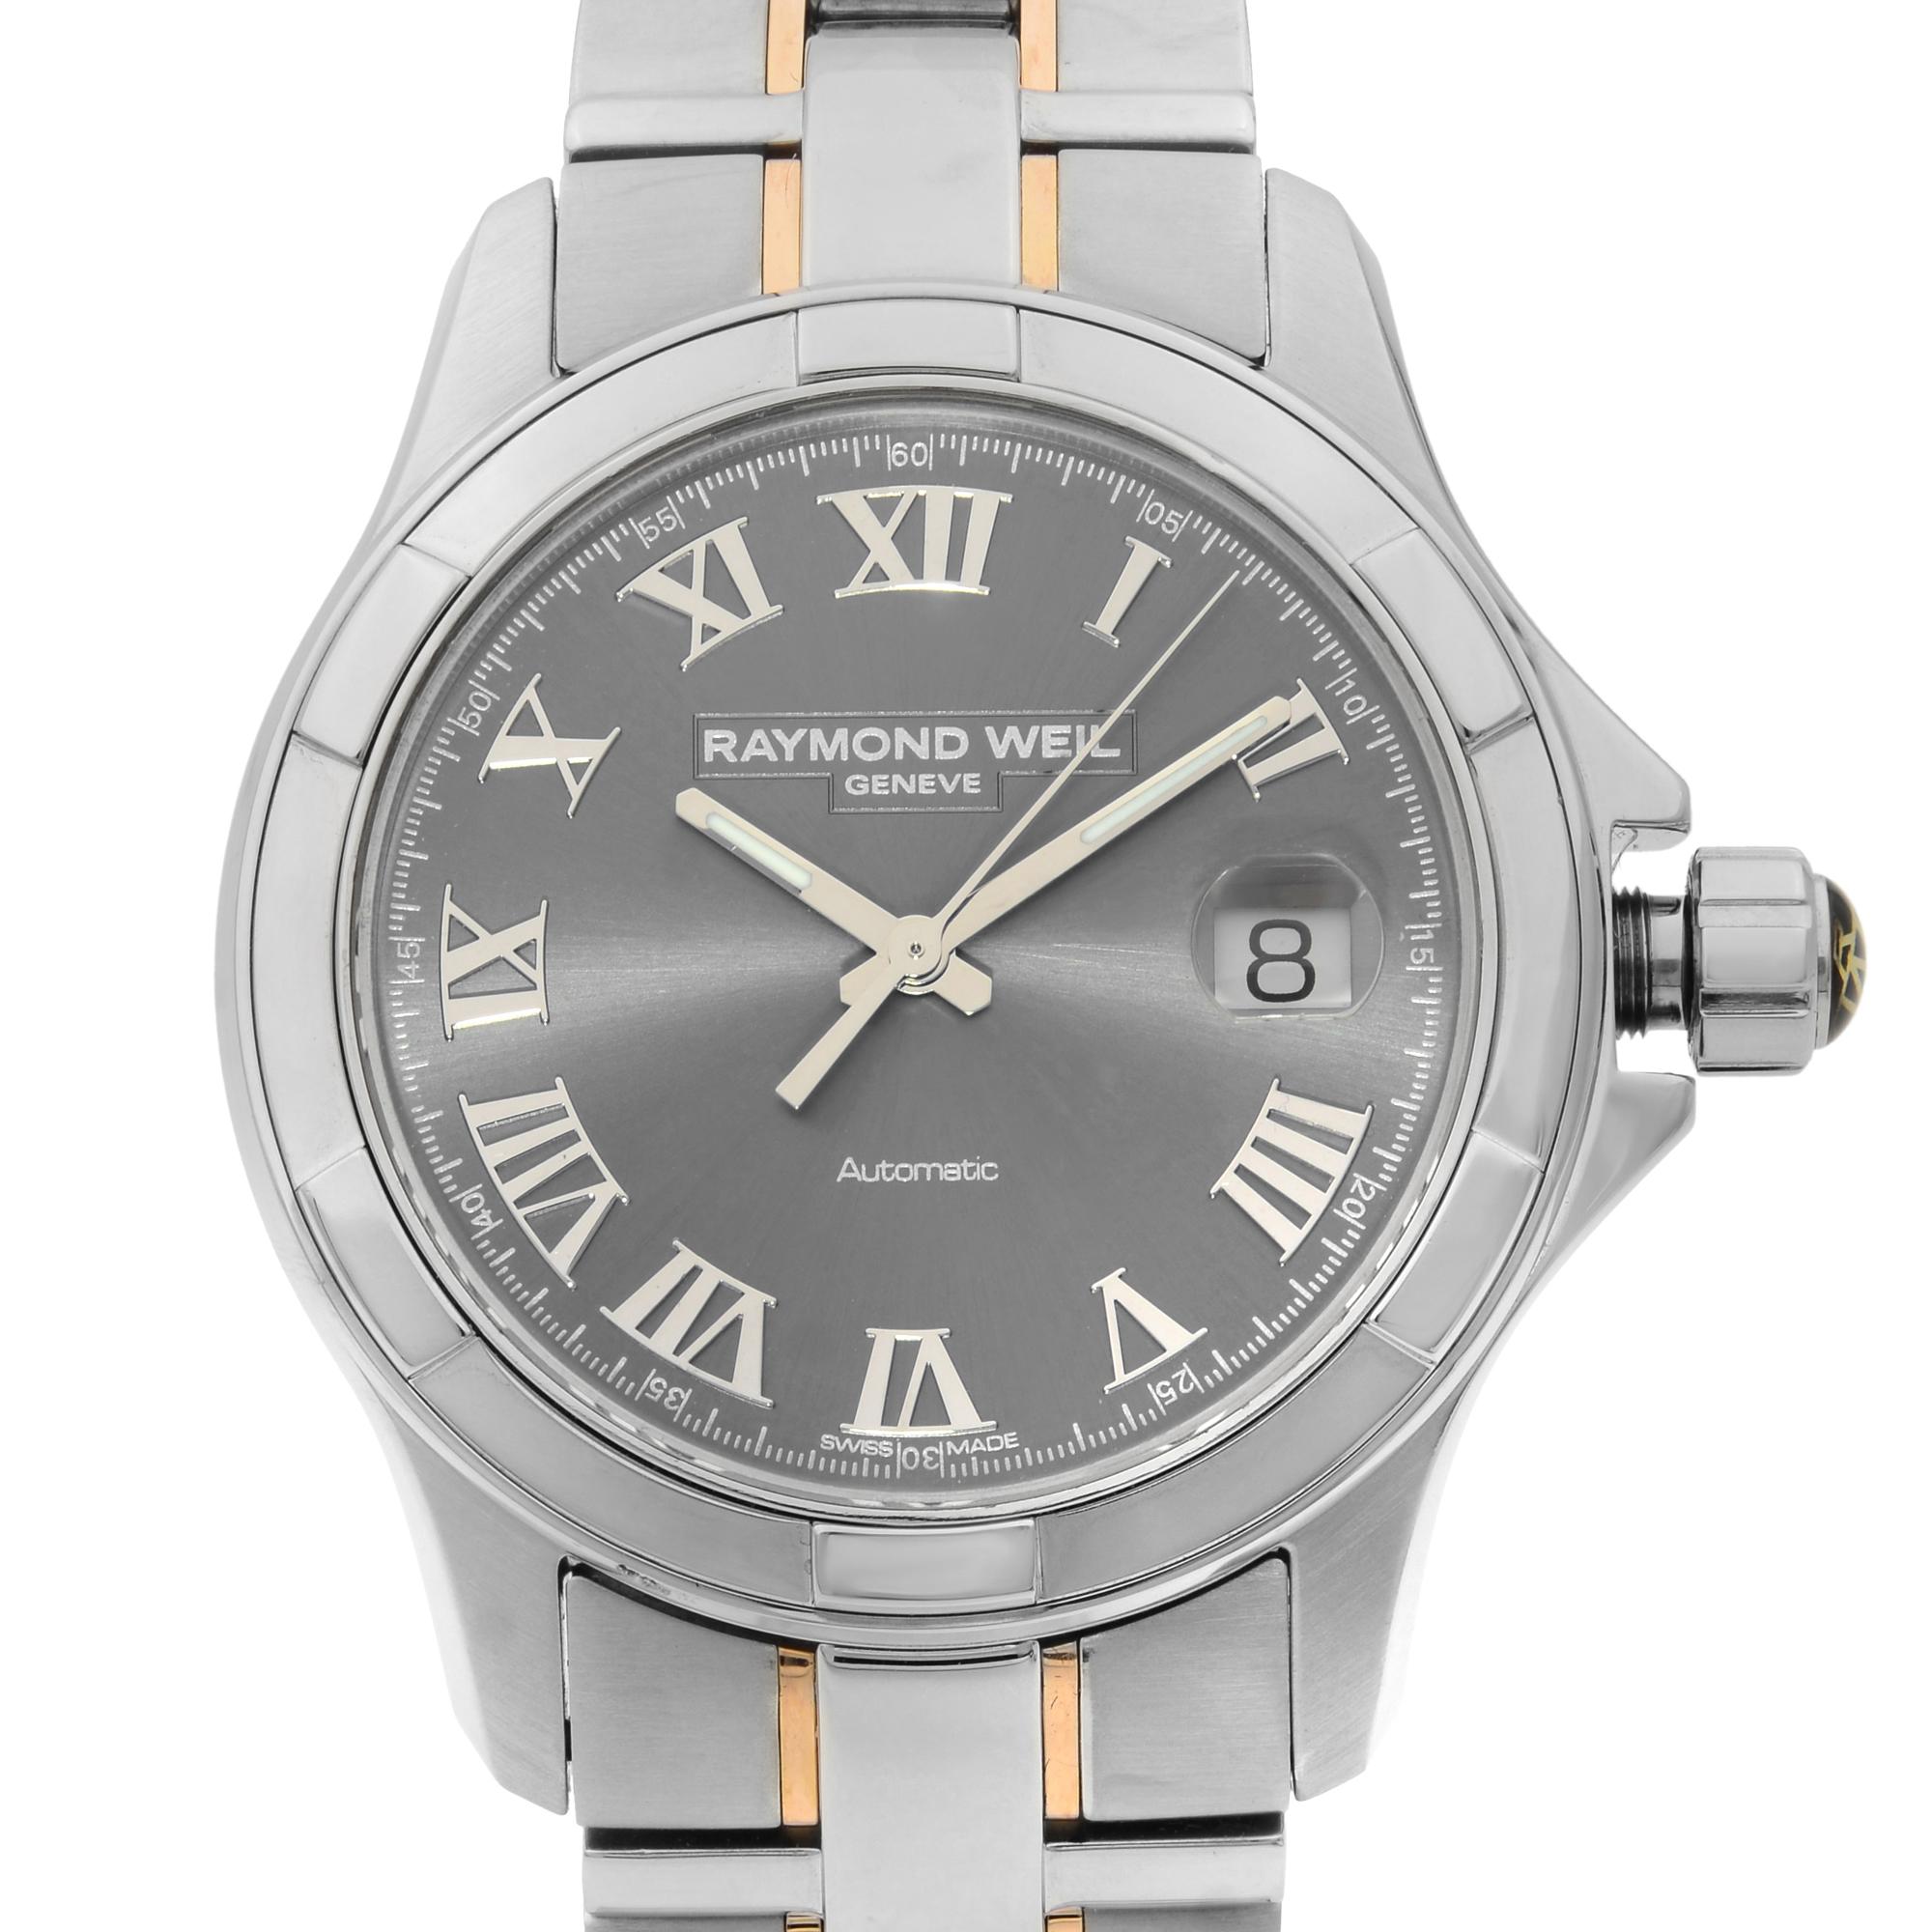 This pre-owned Raymond Weil Parsifal  2970 is a beautiful men's timepiece that is powered by mechanical (automatic) movement which is cased in a stainless steel case. It has a round shape face, date indicator dial and has hand roman numerals style